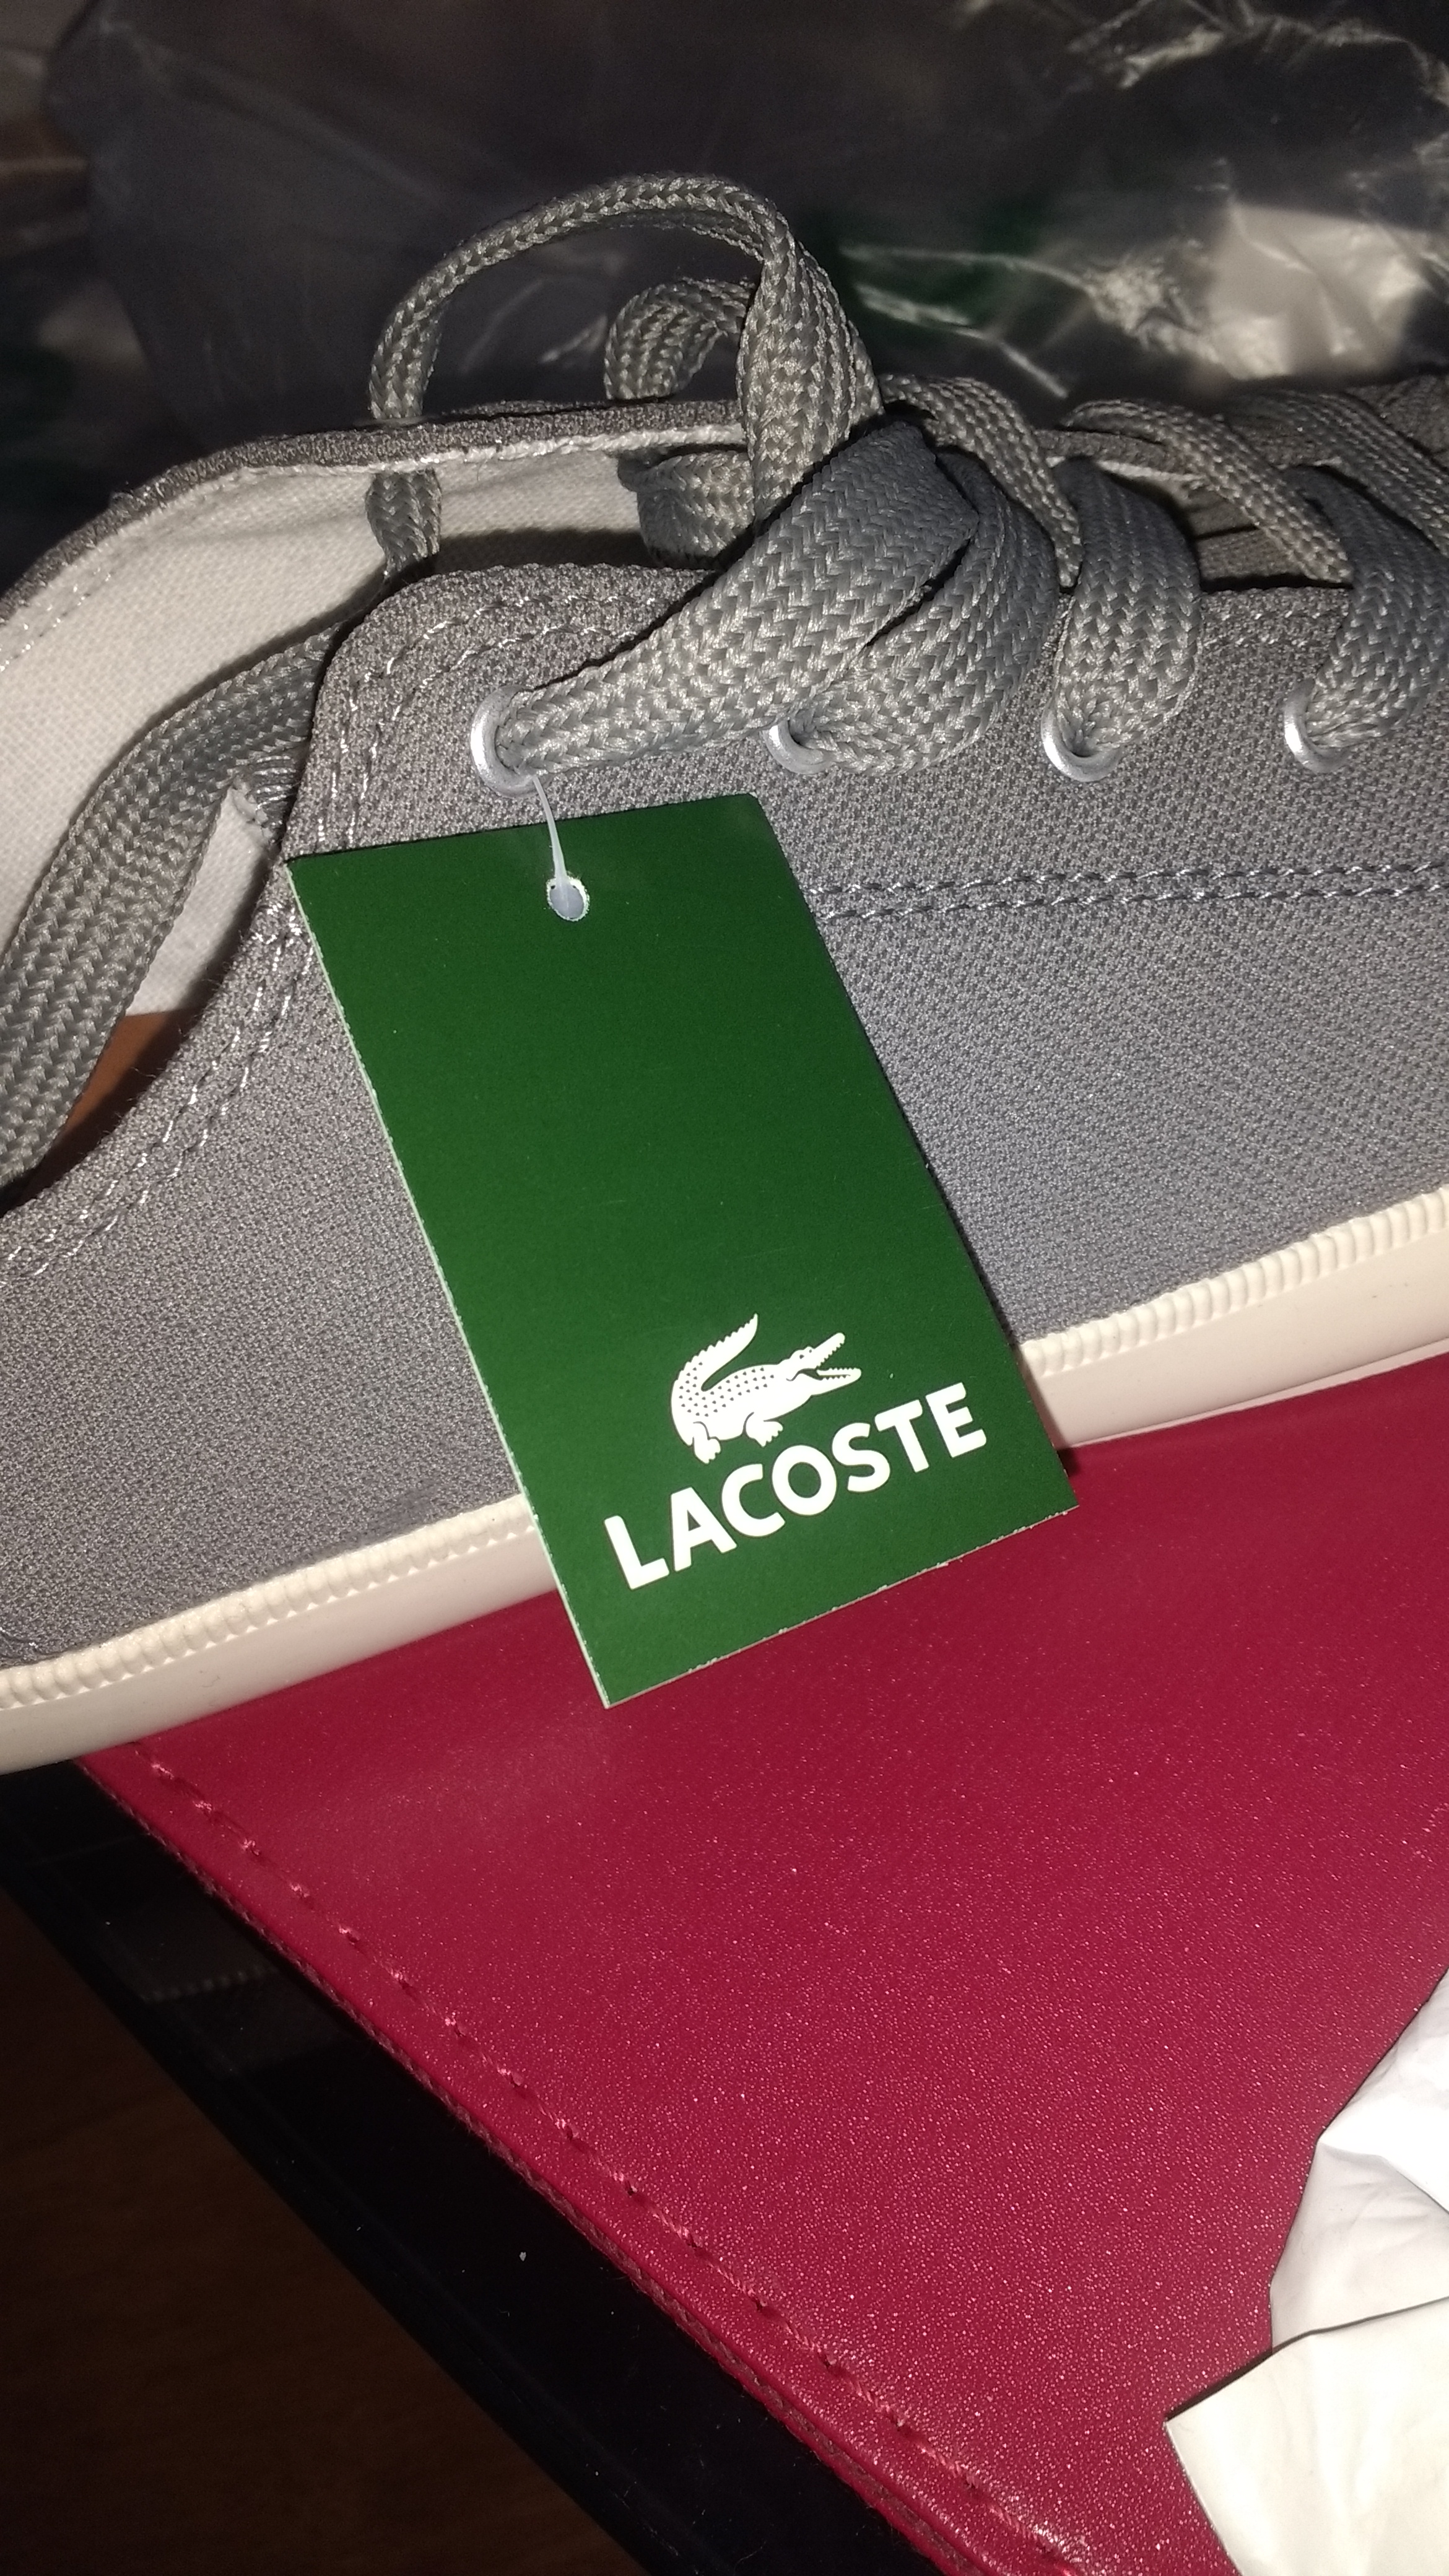 lacoste fake vs real shoes